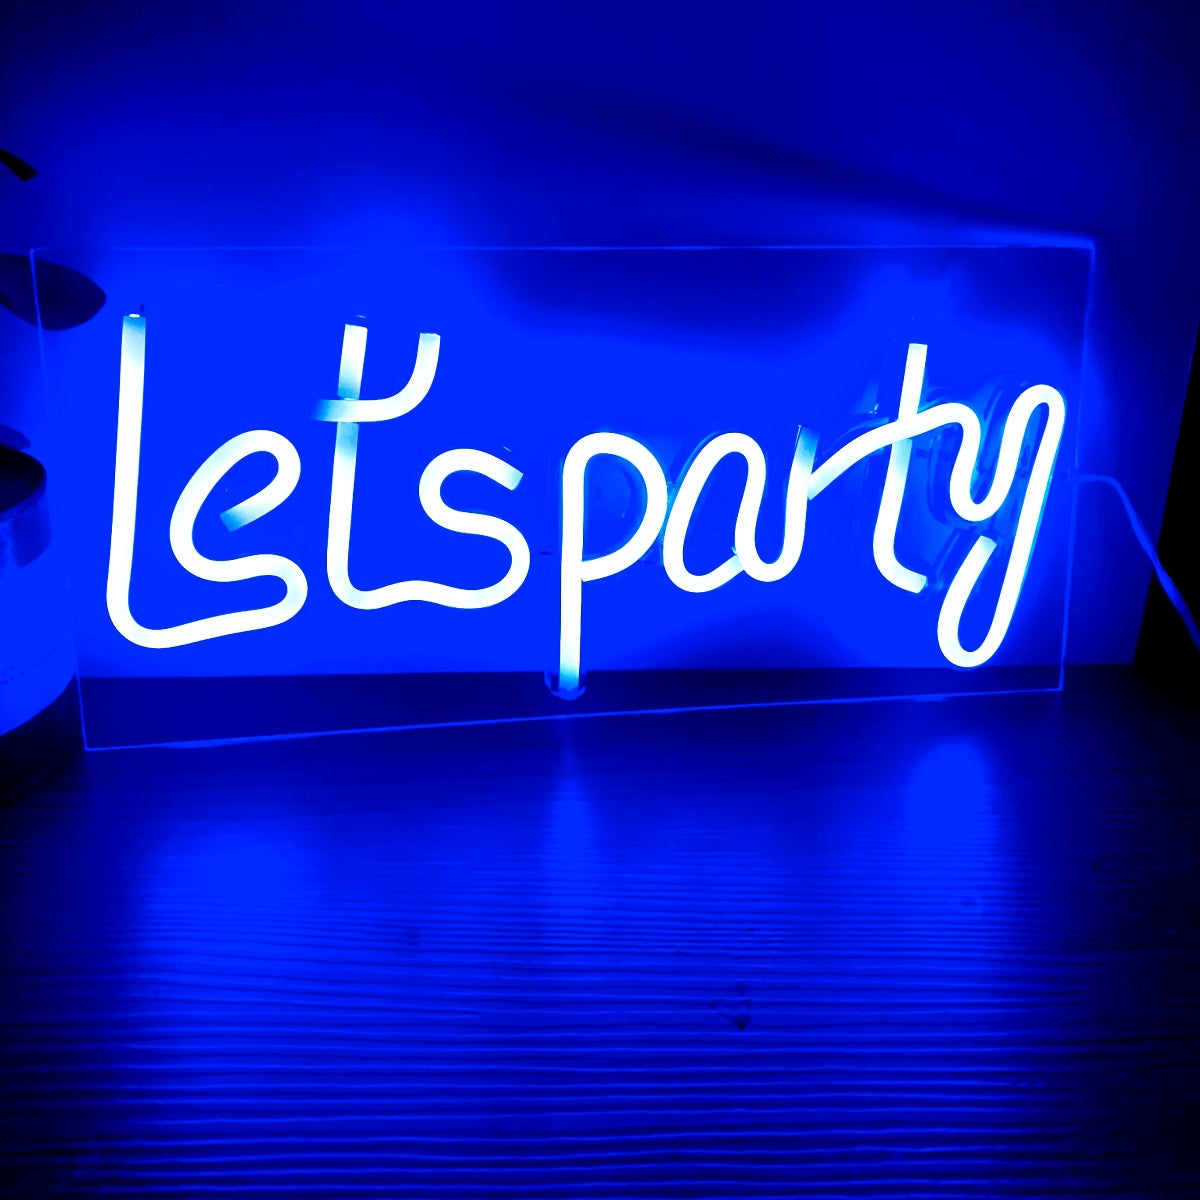 Party Neon Design Lights For Wall Decor